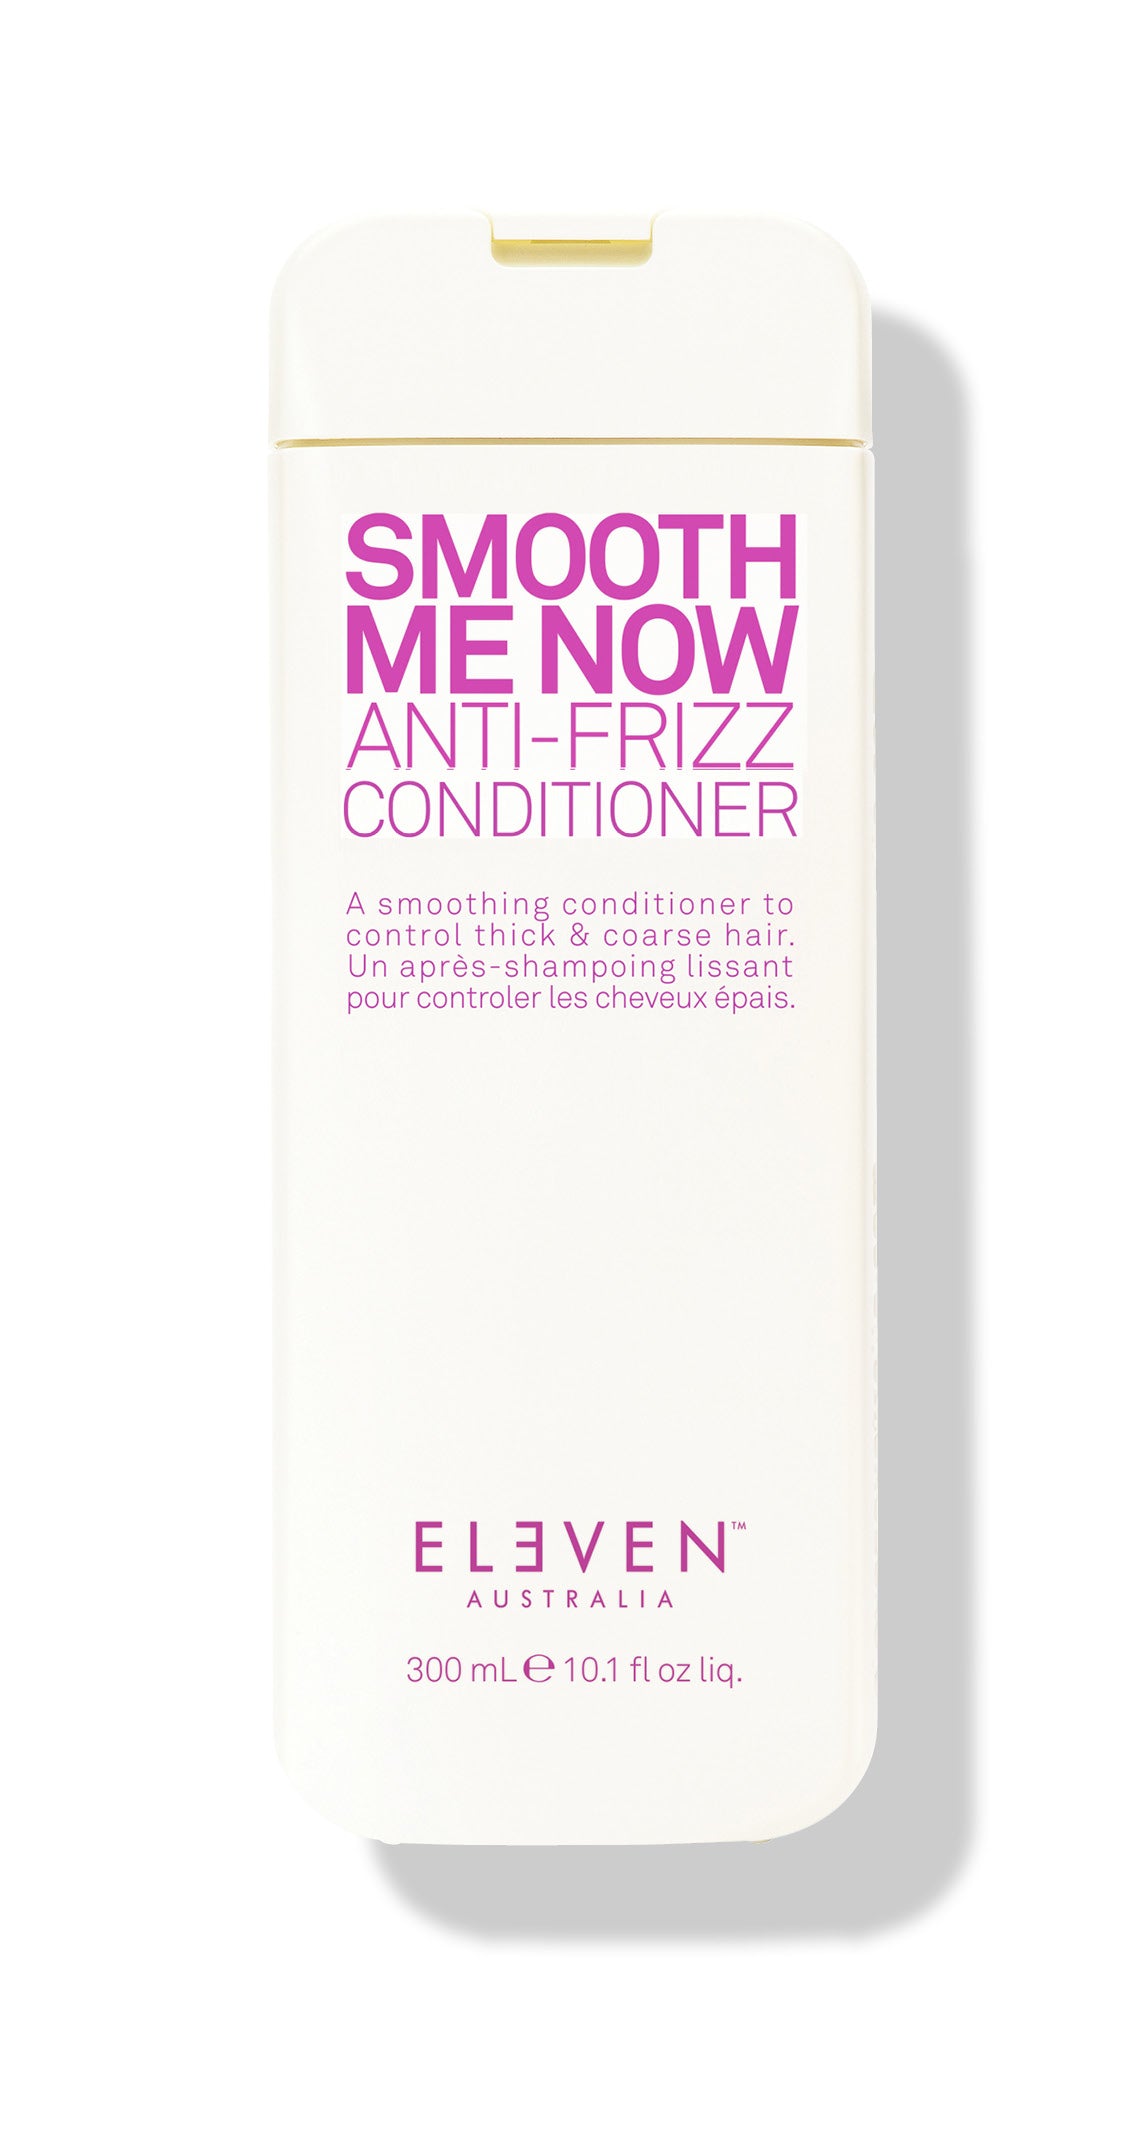 ELEVEN Hair SMOOTH ME NOW ANTI-FRIZZ CONDITIONER. Avocado Oil and Cucumber Extract condition, strengthen and soothes the hair, leaving it smooth and manageable.